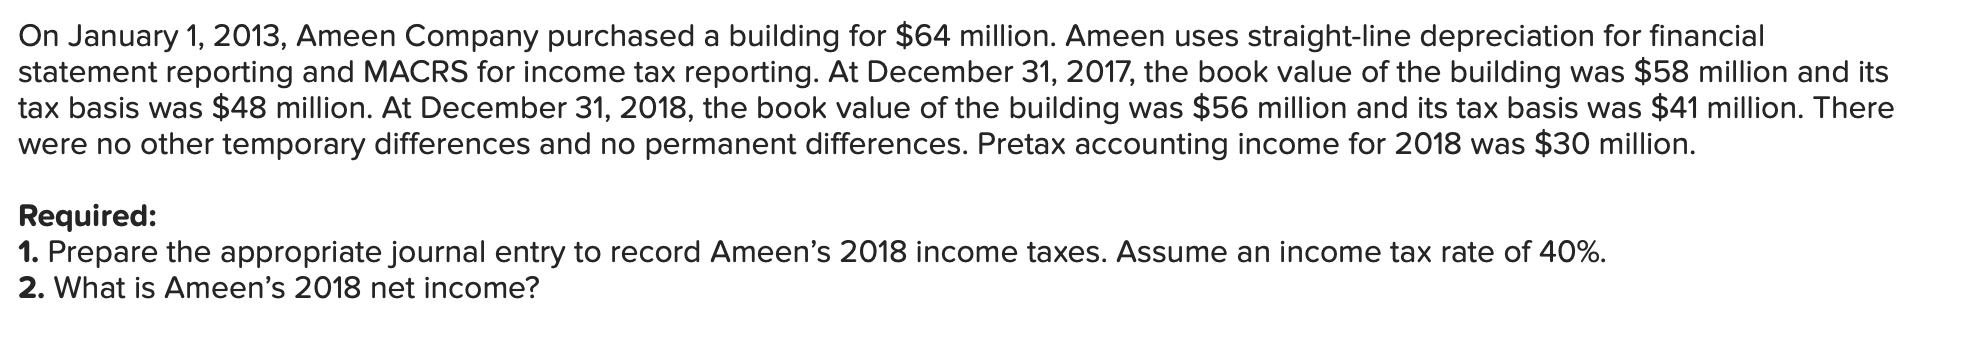 On January 1, 2013, Ameen Company purchased a building for $64 million. Ameen uses straight-line depreciation for financials